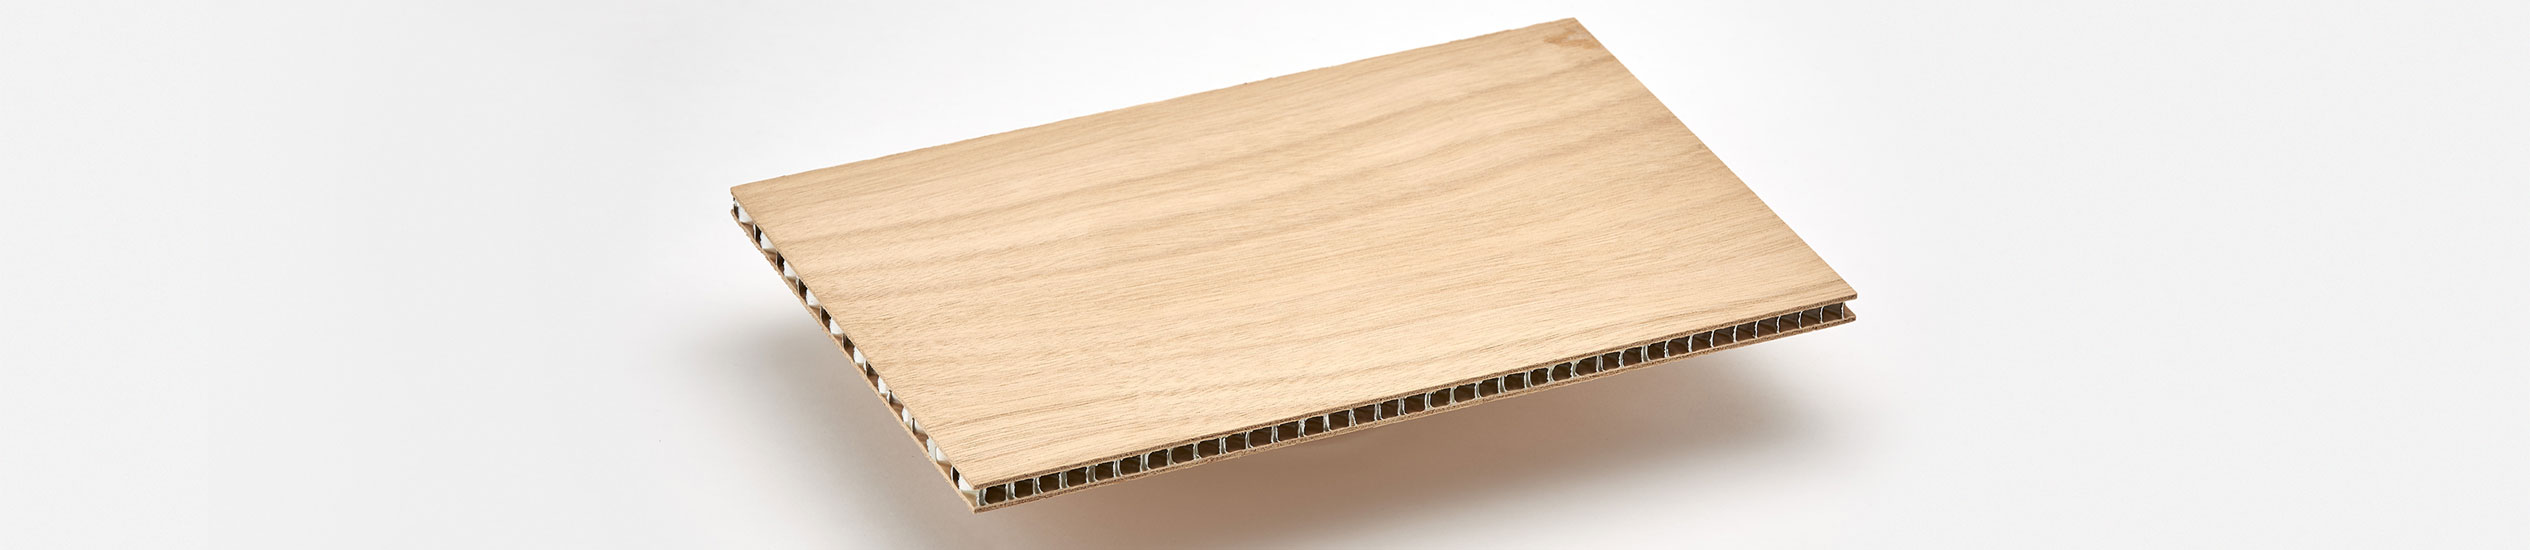 COMPOCEL® W is a sandwich panel with an aluminium honeycomb core and skins in plywood. In shipbuilding sandwich panels it can be used for the interior design